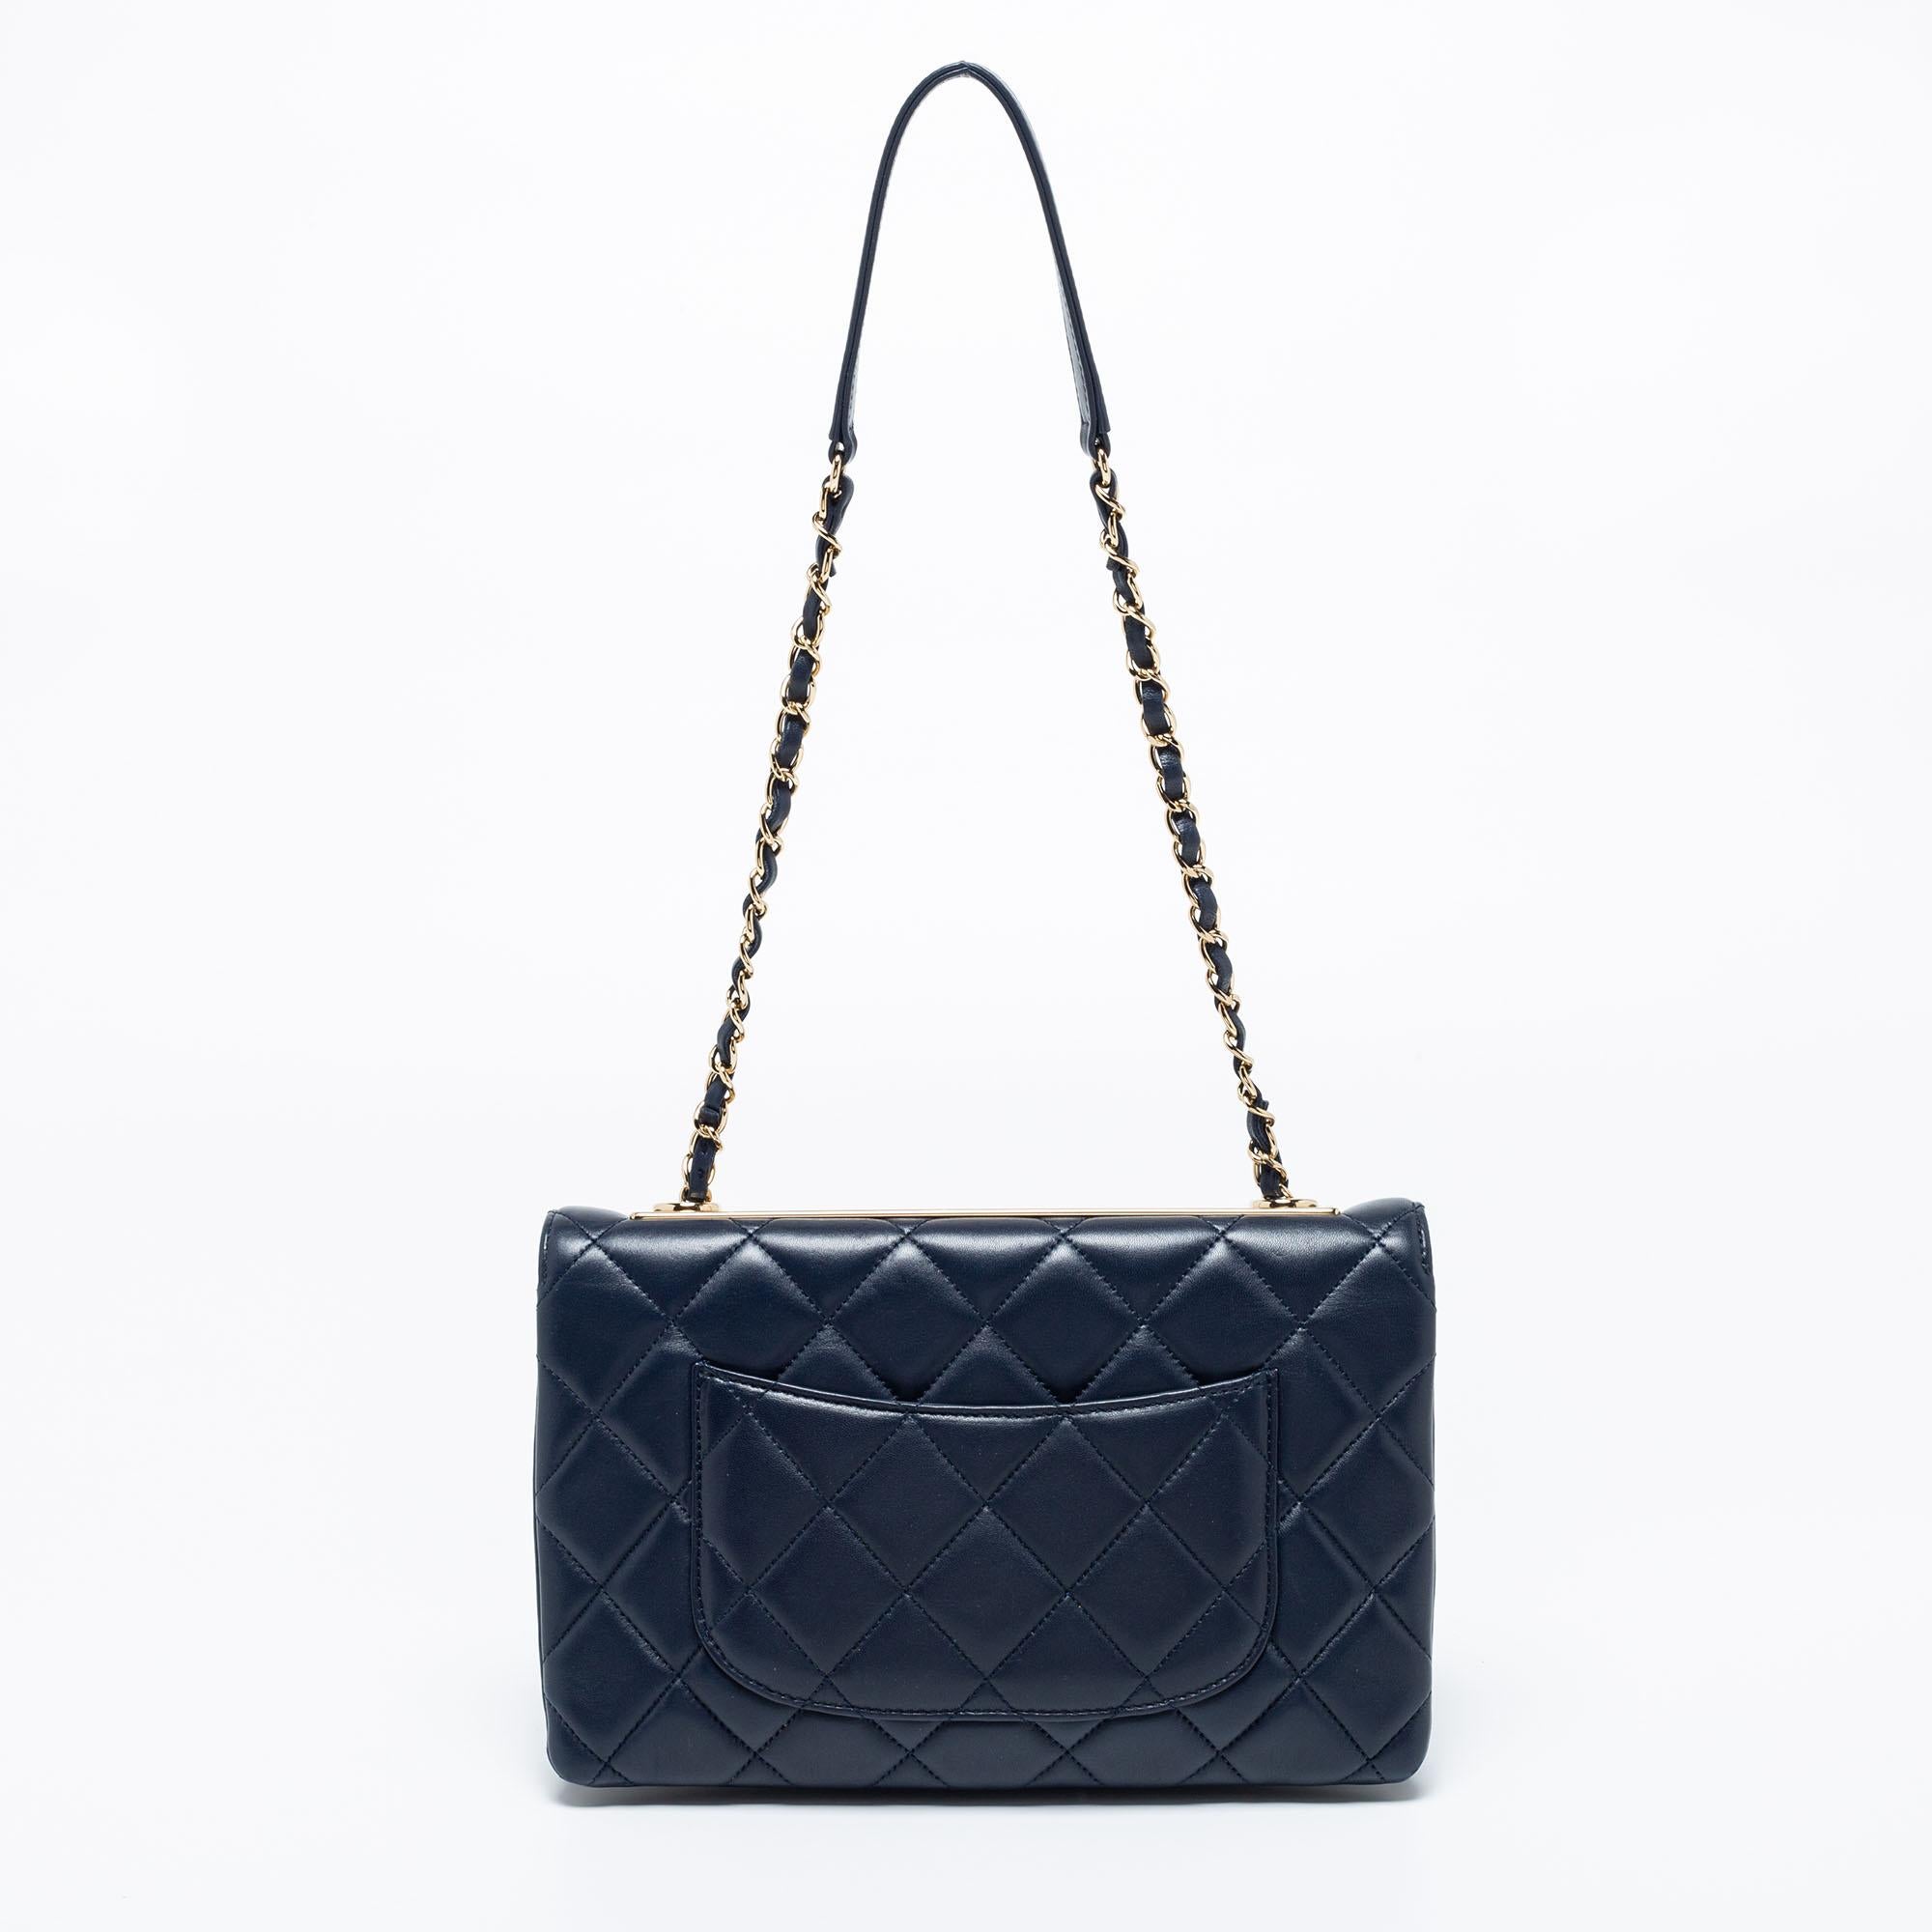 We're bringing Chanel's iconic flap bag to your closet with this beautiful creation. Exquisitely crafted from quilted leather, it bears the signature label inside the leather interior and the iconic CC turn-lock on the flap. The bag has gold-tone